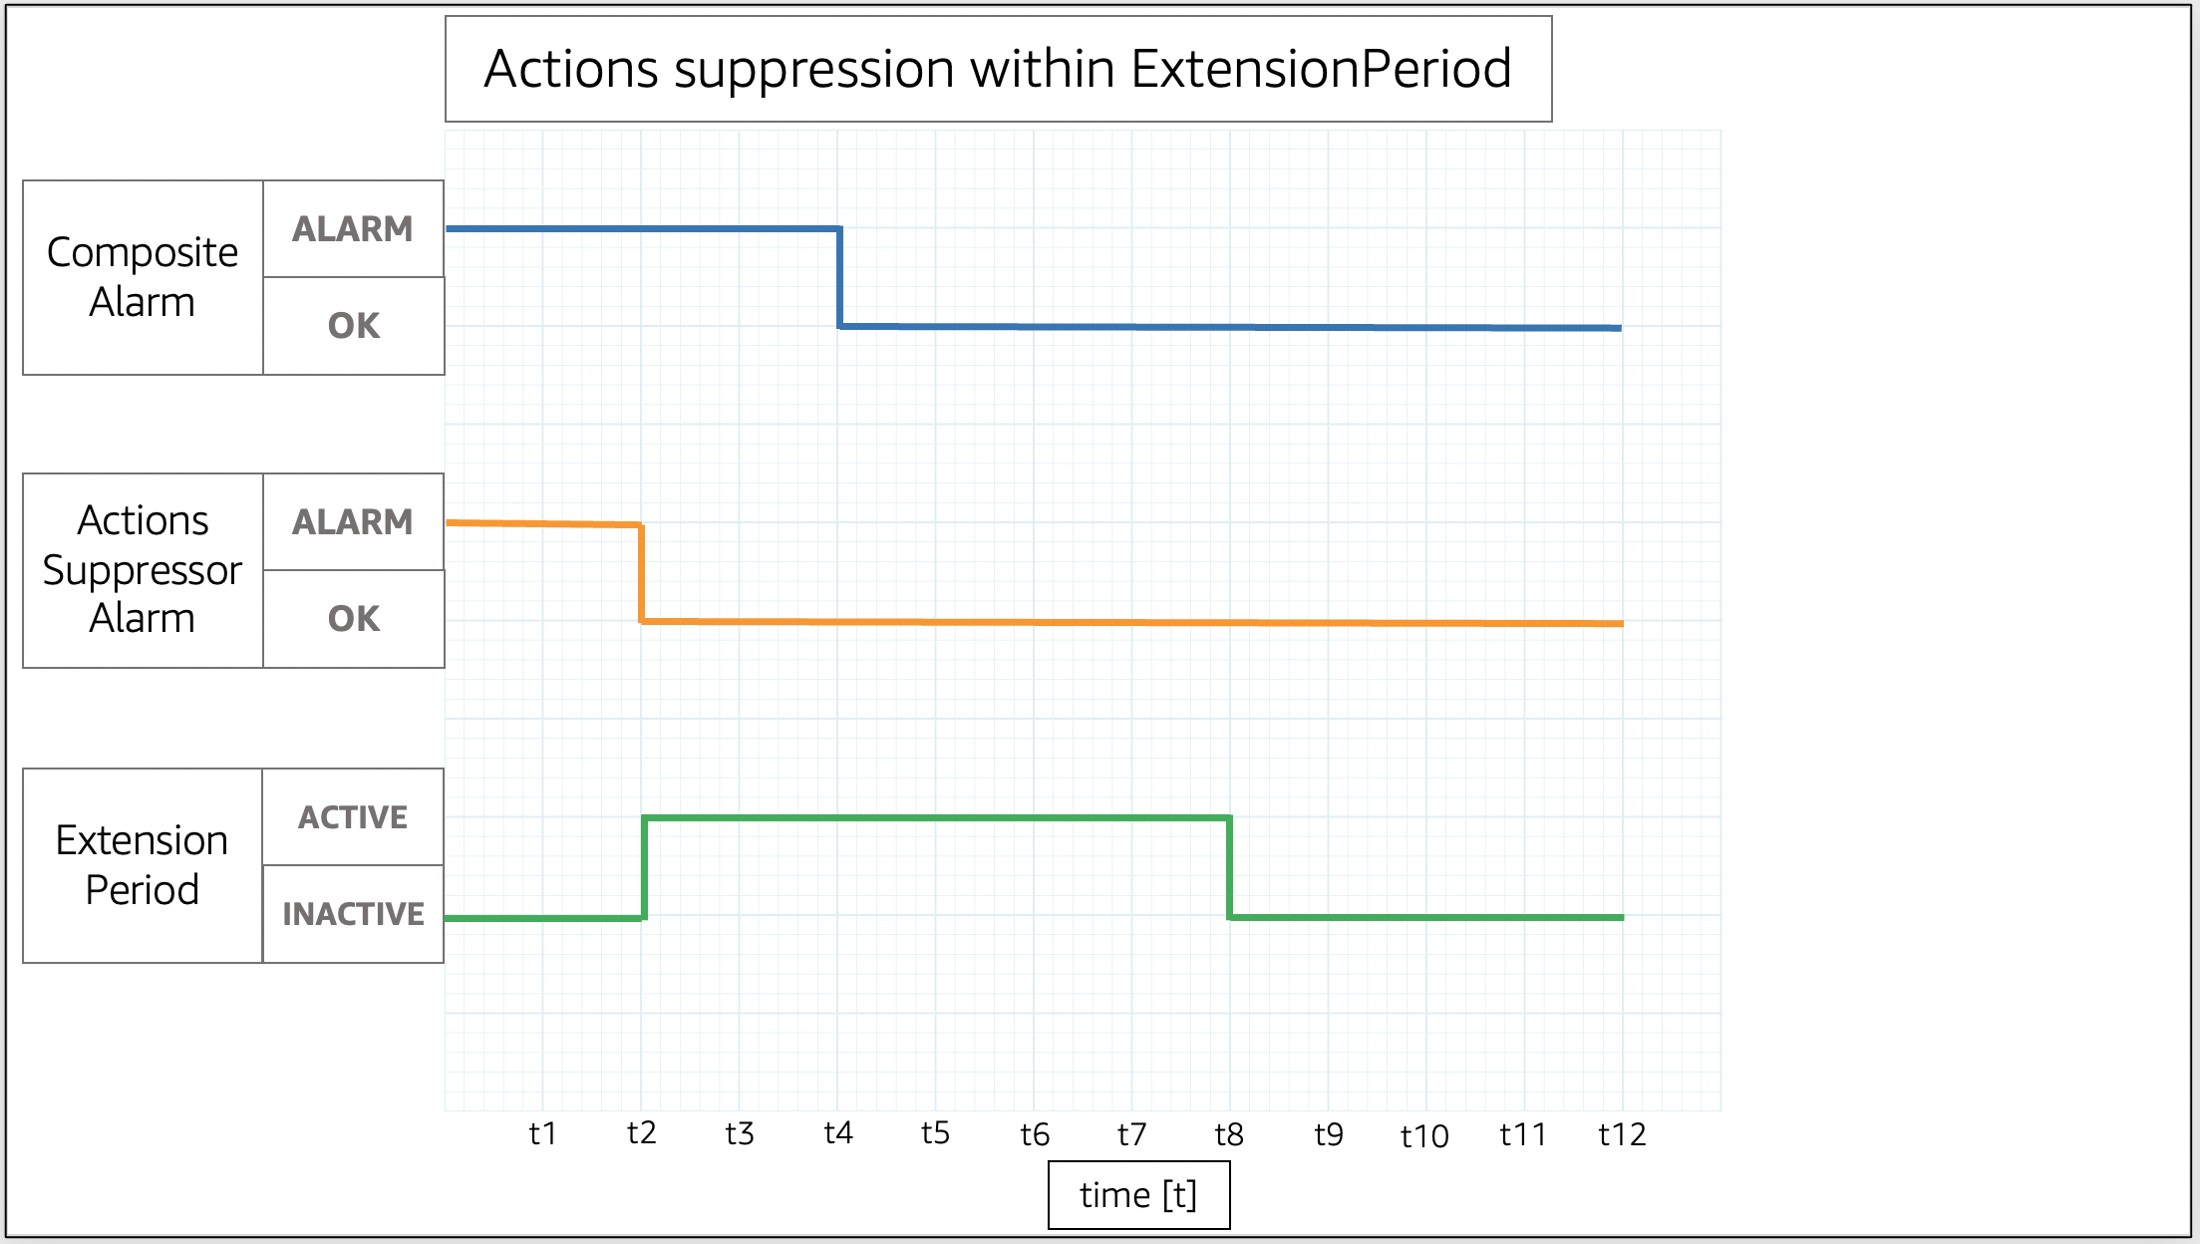 Actions suppression within ExtensionPeriod